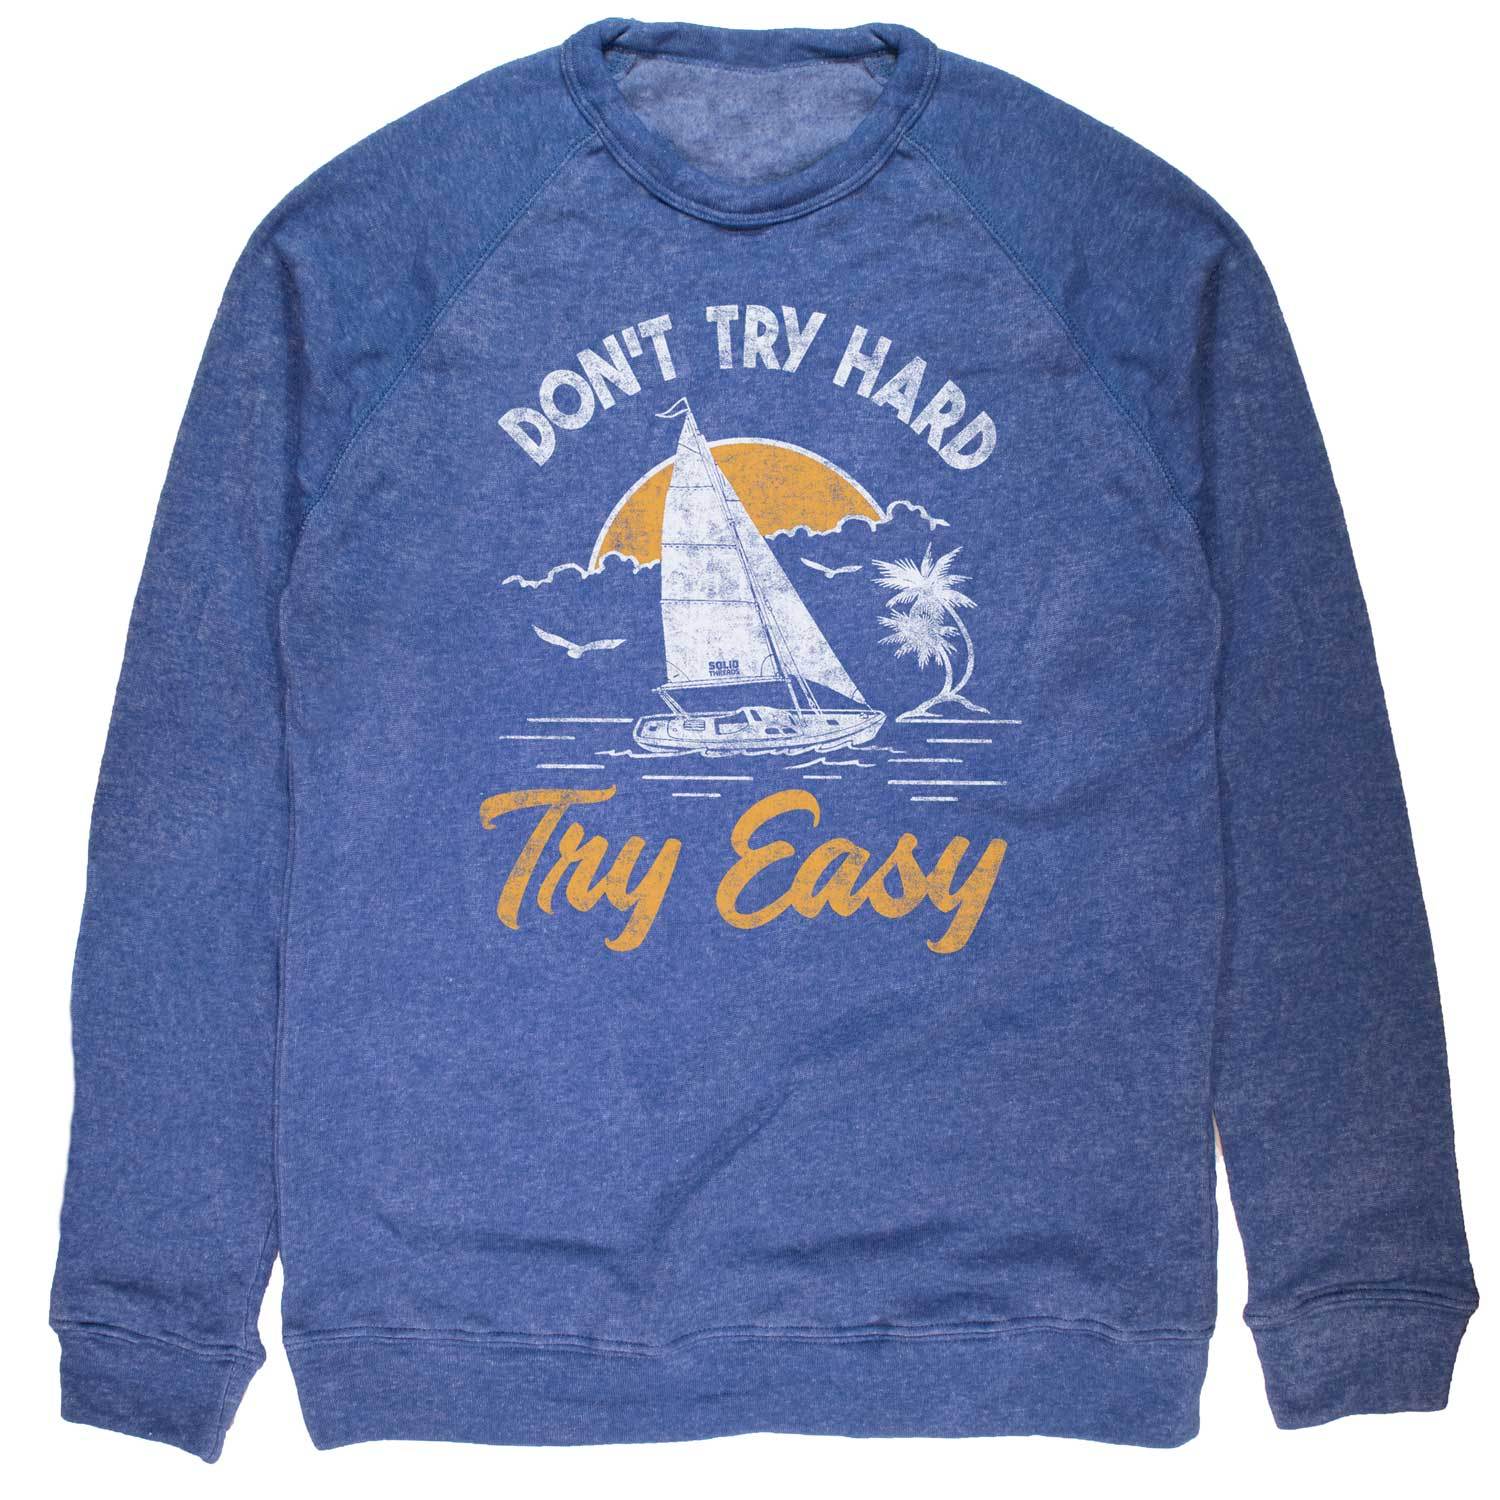 Don't Try Hard Try Easy Vintage Inspired Fleece Crewneck Sweatshirt with cool sail boat graphic | Solid Threads